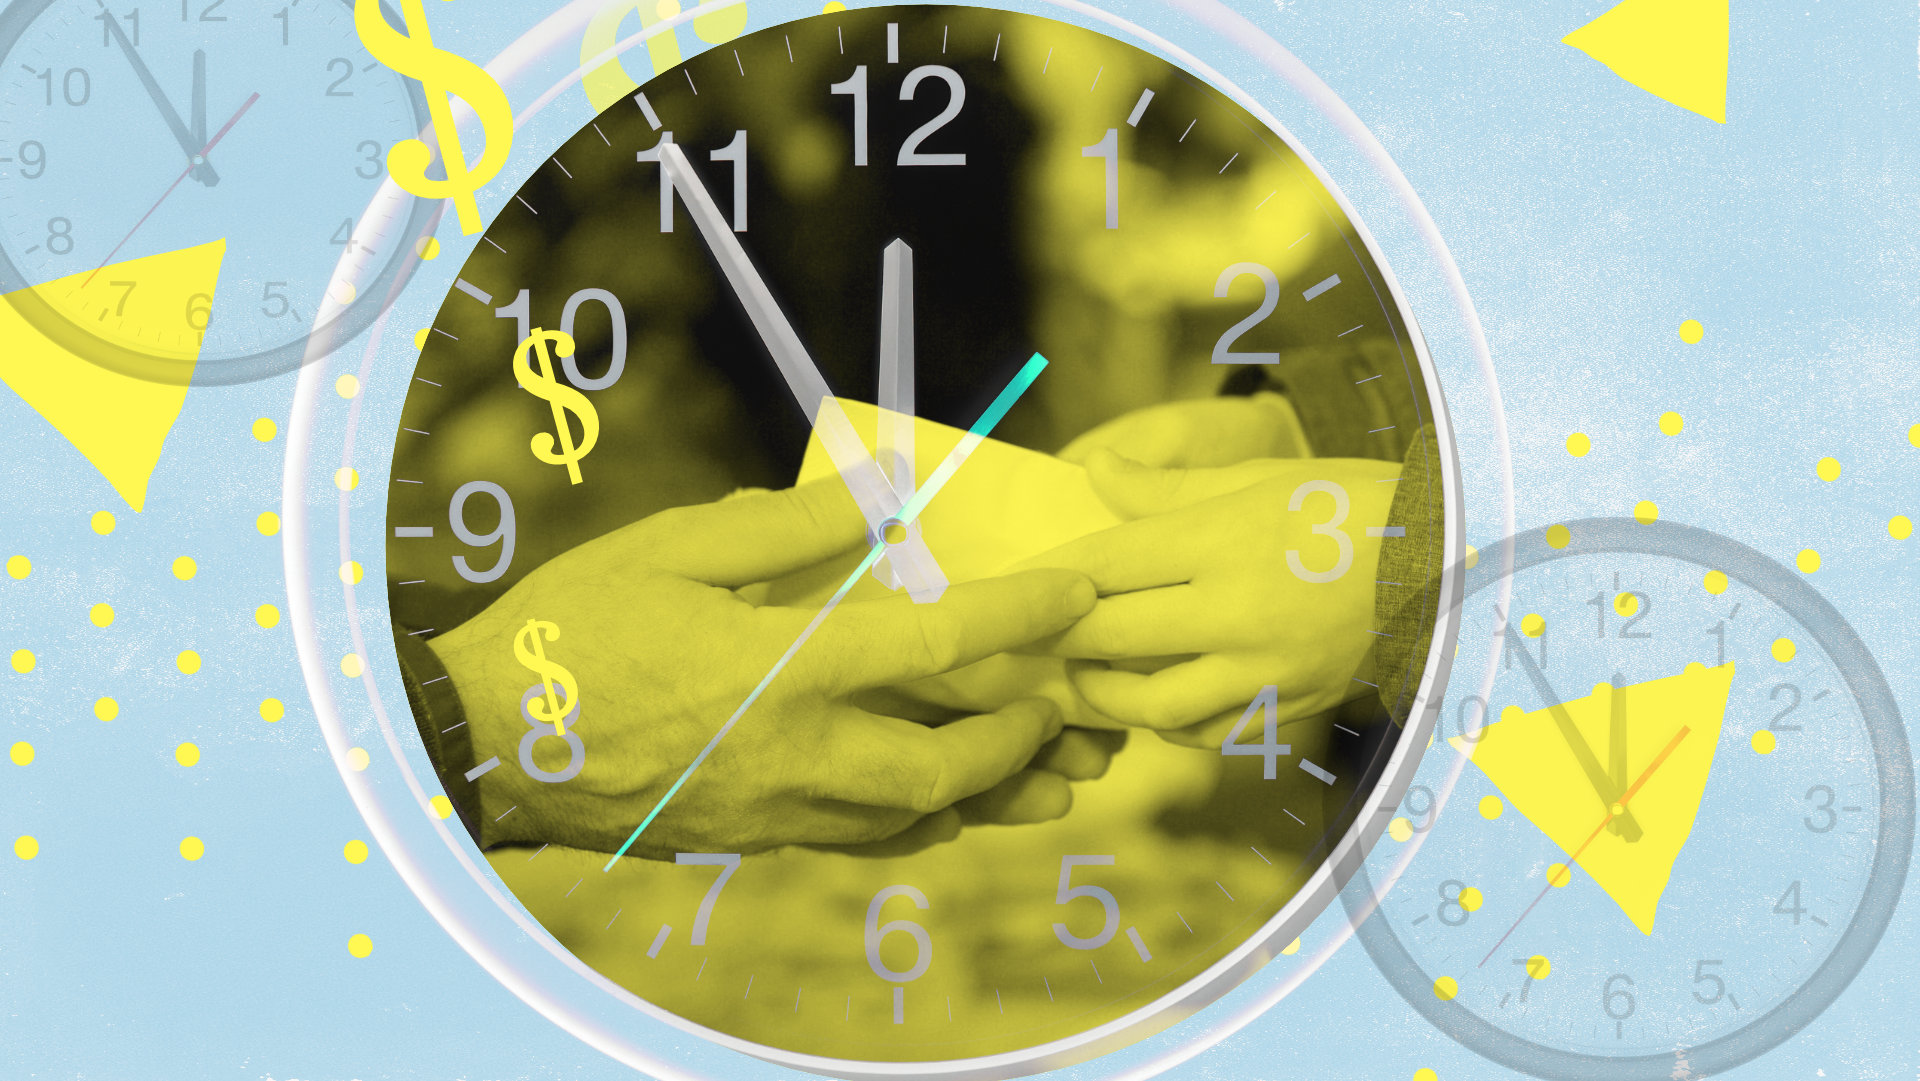 An image of an adult’s hands and a child’s hands exchanging a piece of paper, over which a clock face is seen.